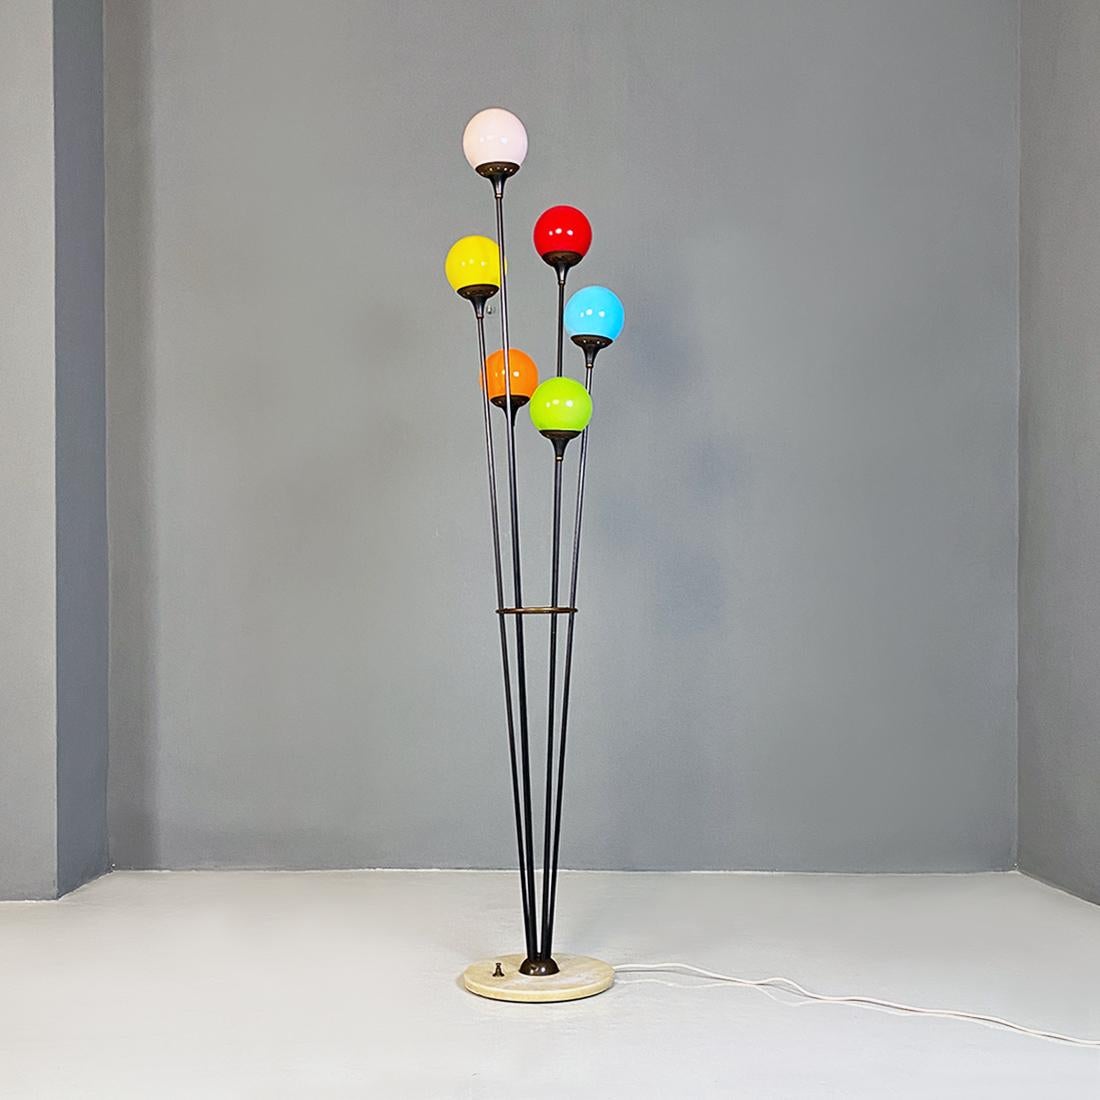 Italian Mid-Century Modern marble base, metal structure and glass lampshade Alberello floor lamp by Stilnovo, 1950s
Alberello model lamp, 6 lights with round marble base, black metal rod structure and brass details. Sphere diffusers in colored